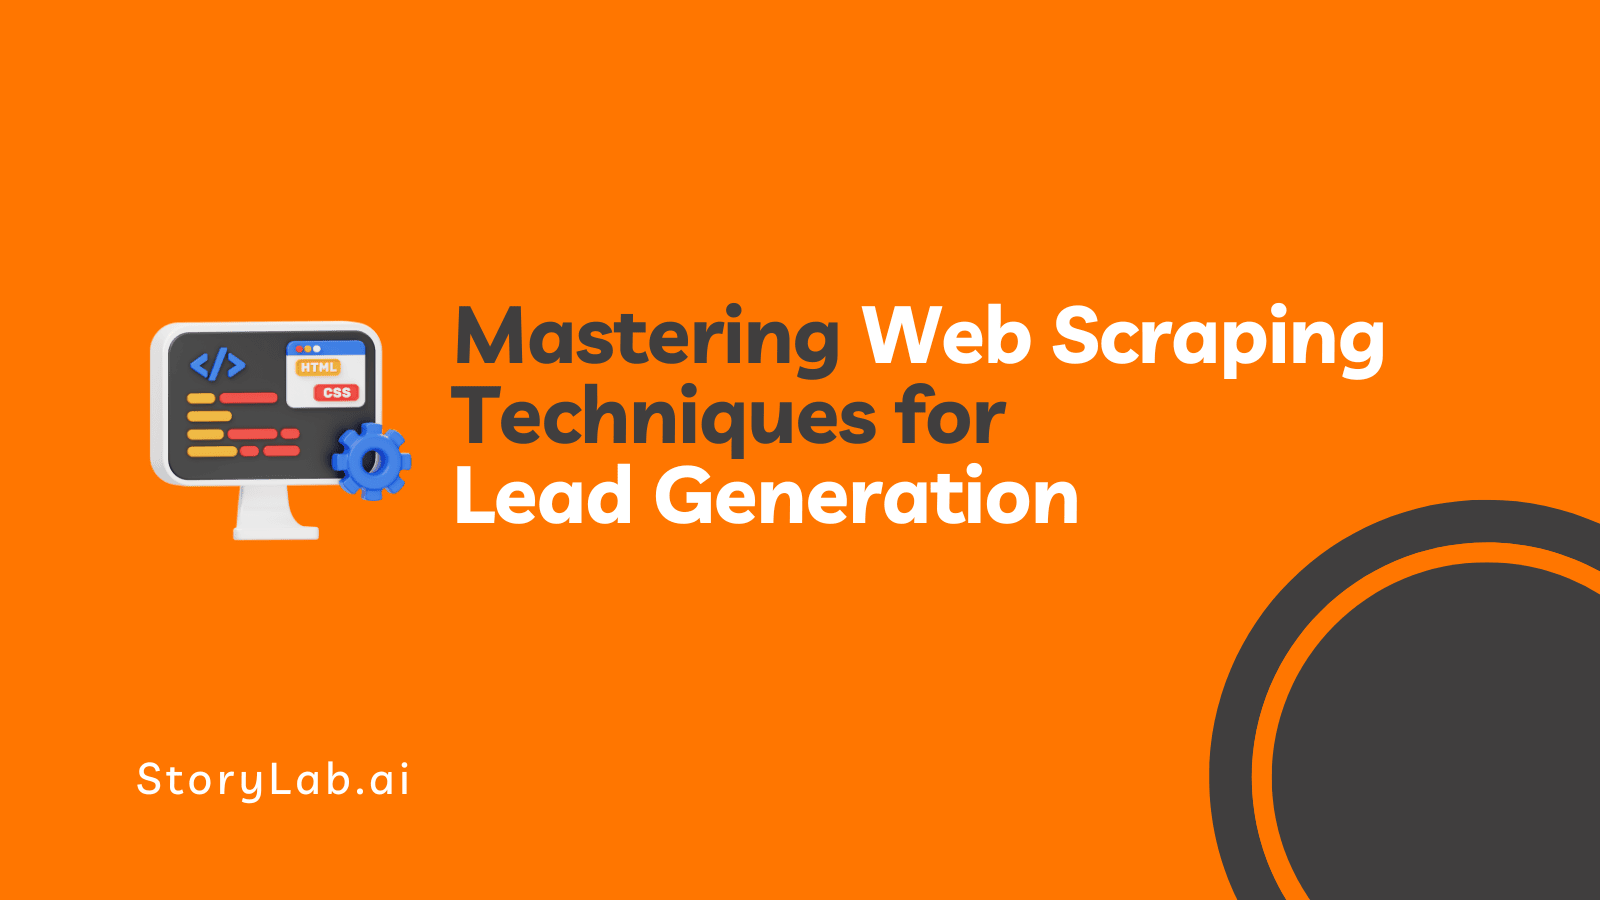 Mastering Web Scraping Techniques for Lead Generation